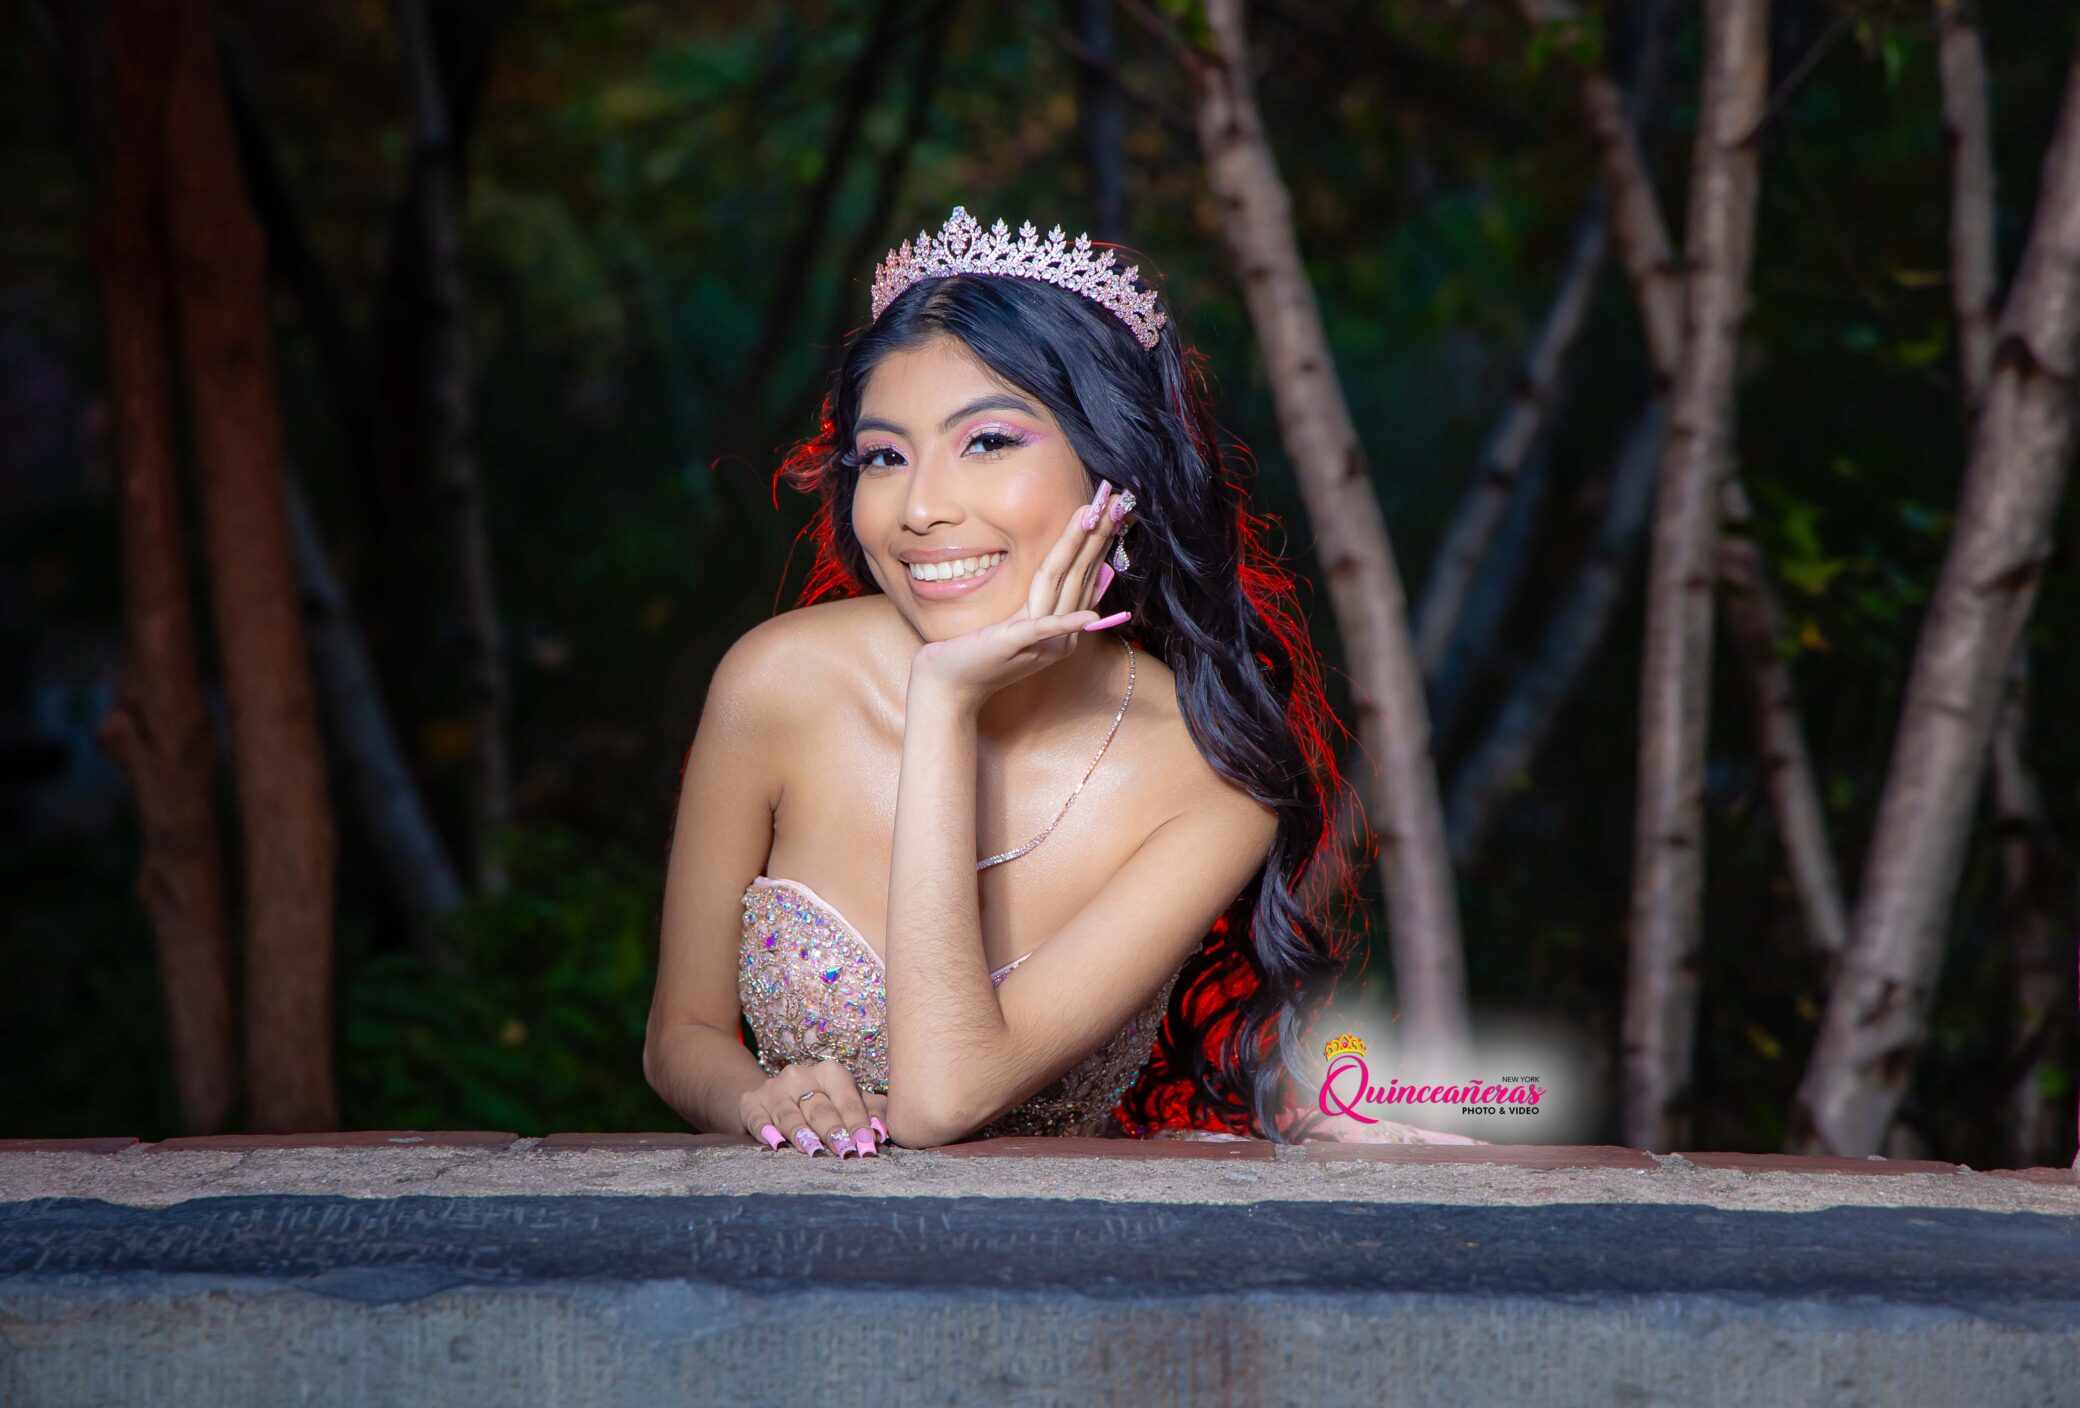 Sweet 16-Quinceañeras. Affordable Sweet sixteen photography and video in New York City (Brooklyn, Manhattan, Bronx, Queens, Staten Island).